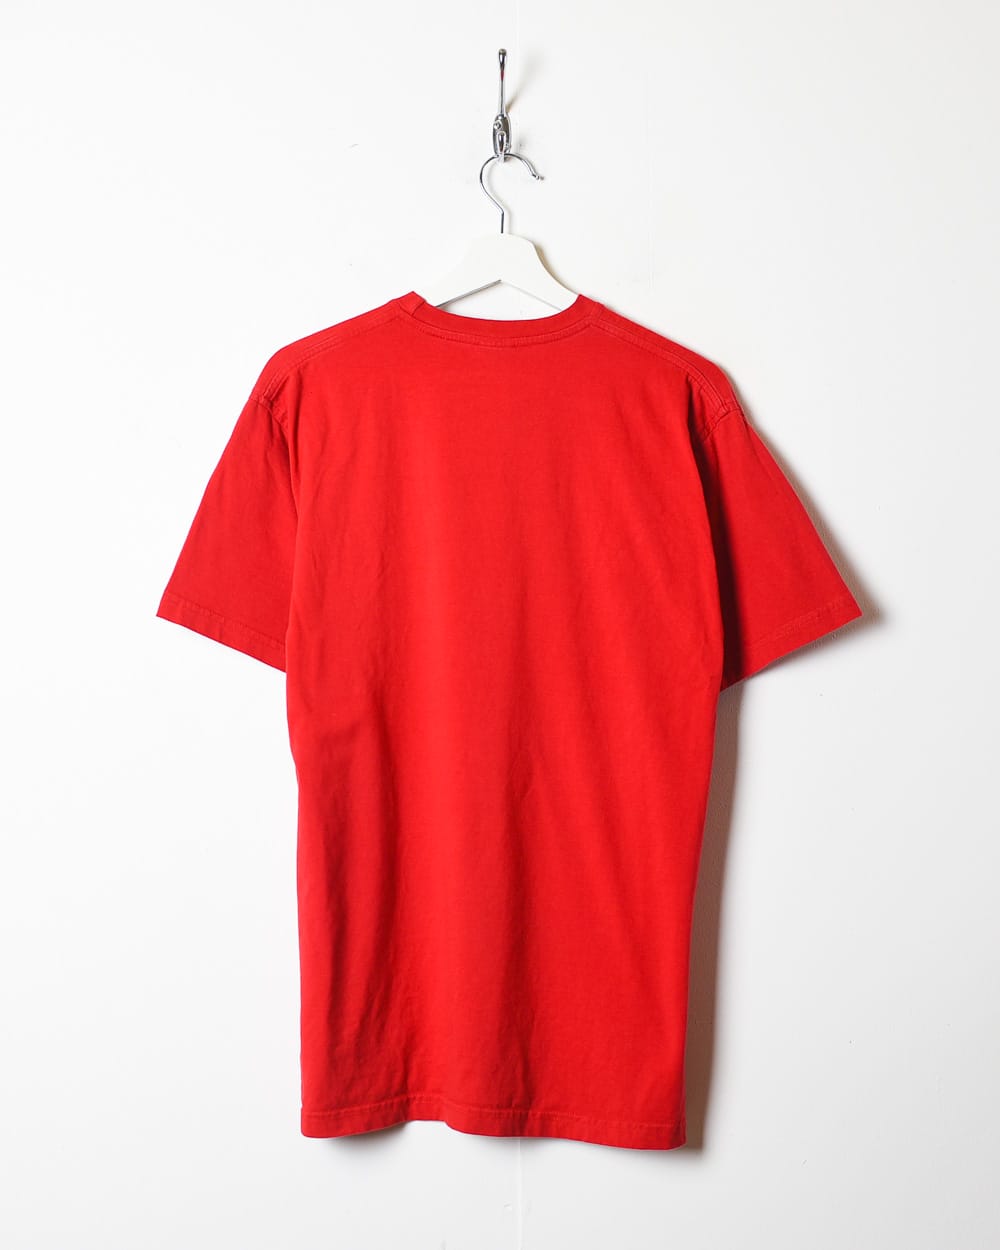 Red Timberland T-Shirt - X-Large